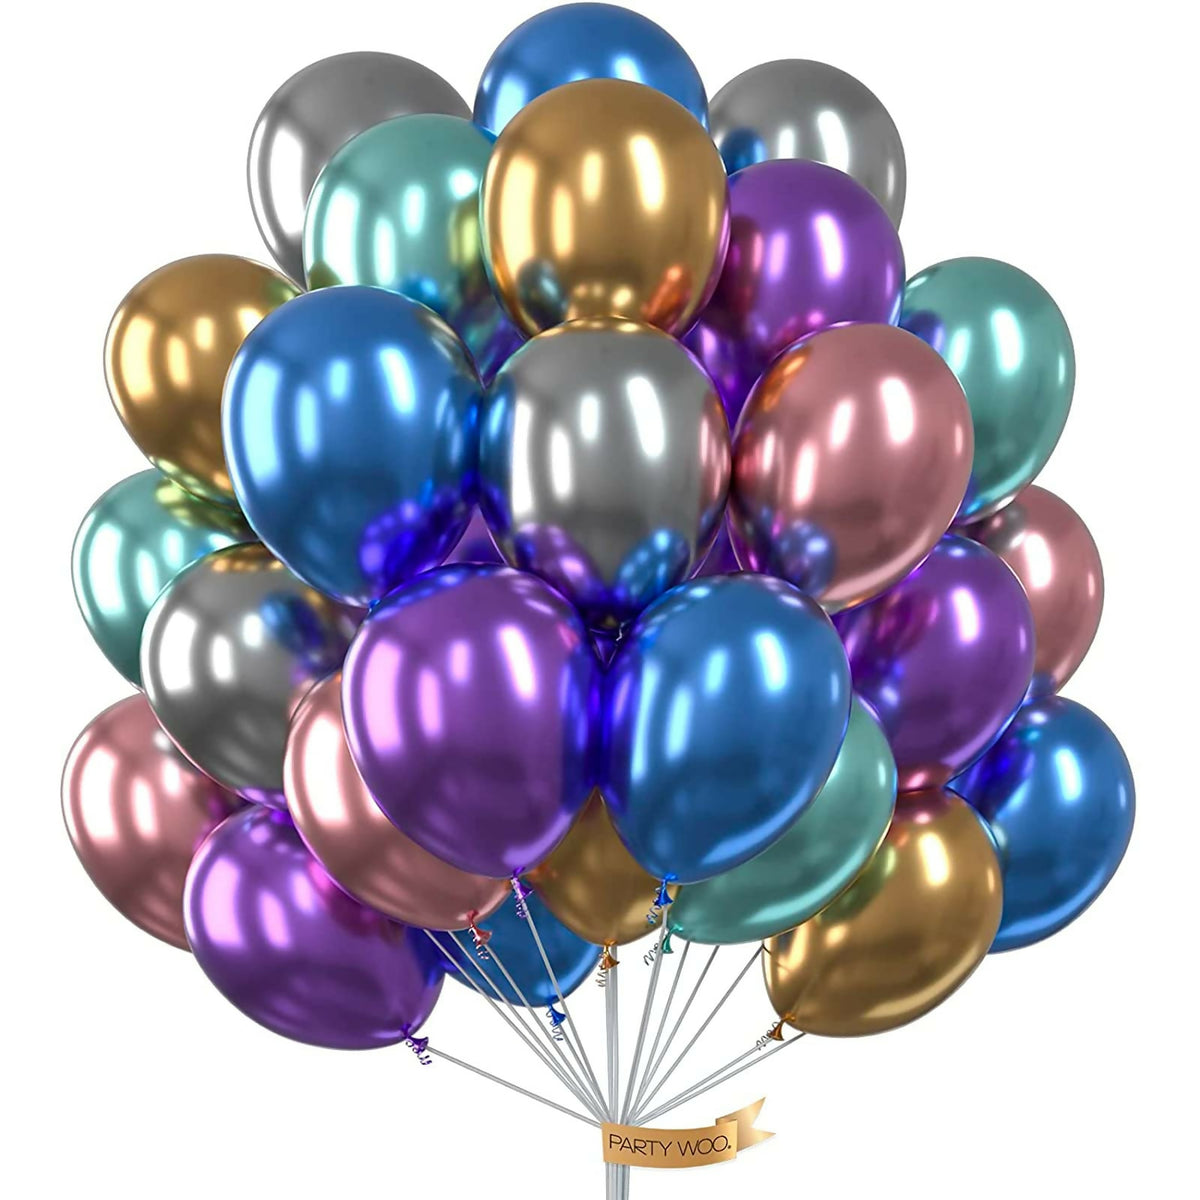 Pack of 30 Premium Quality Metallic Balloons For Your Best Day , Silver, Blue, Black, Golden